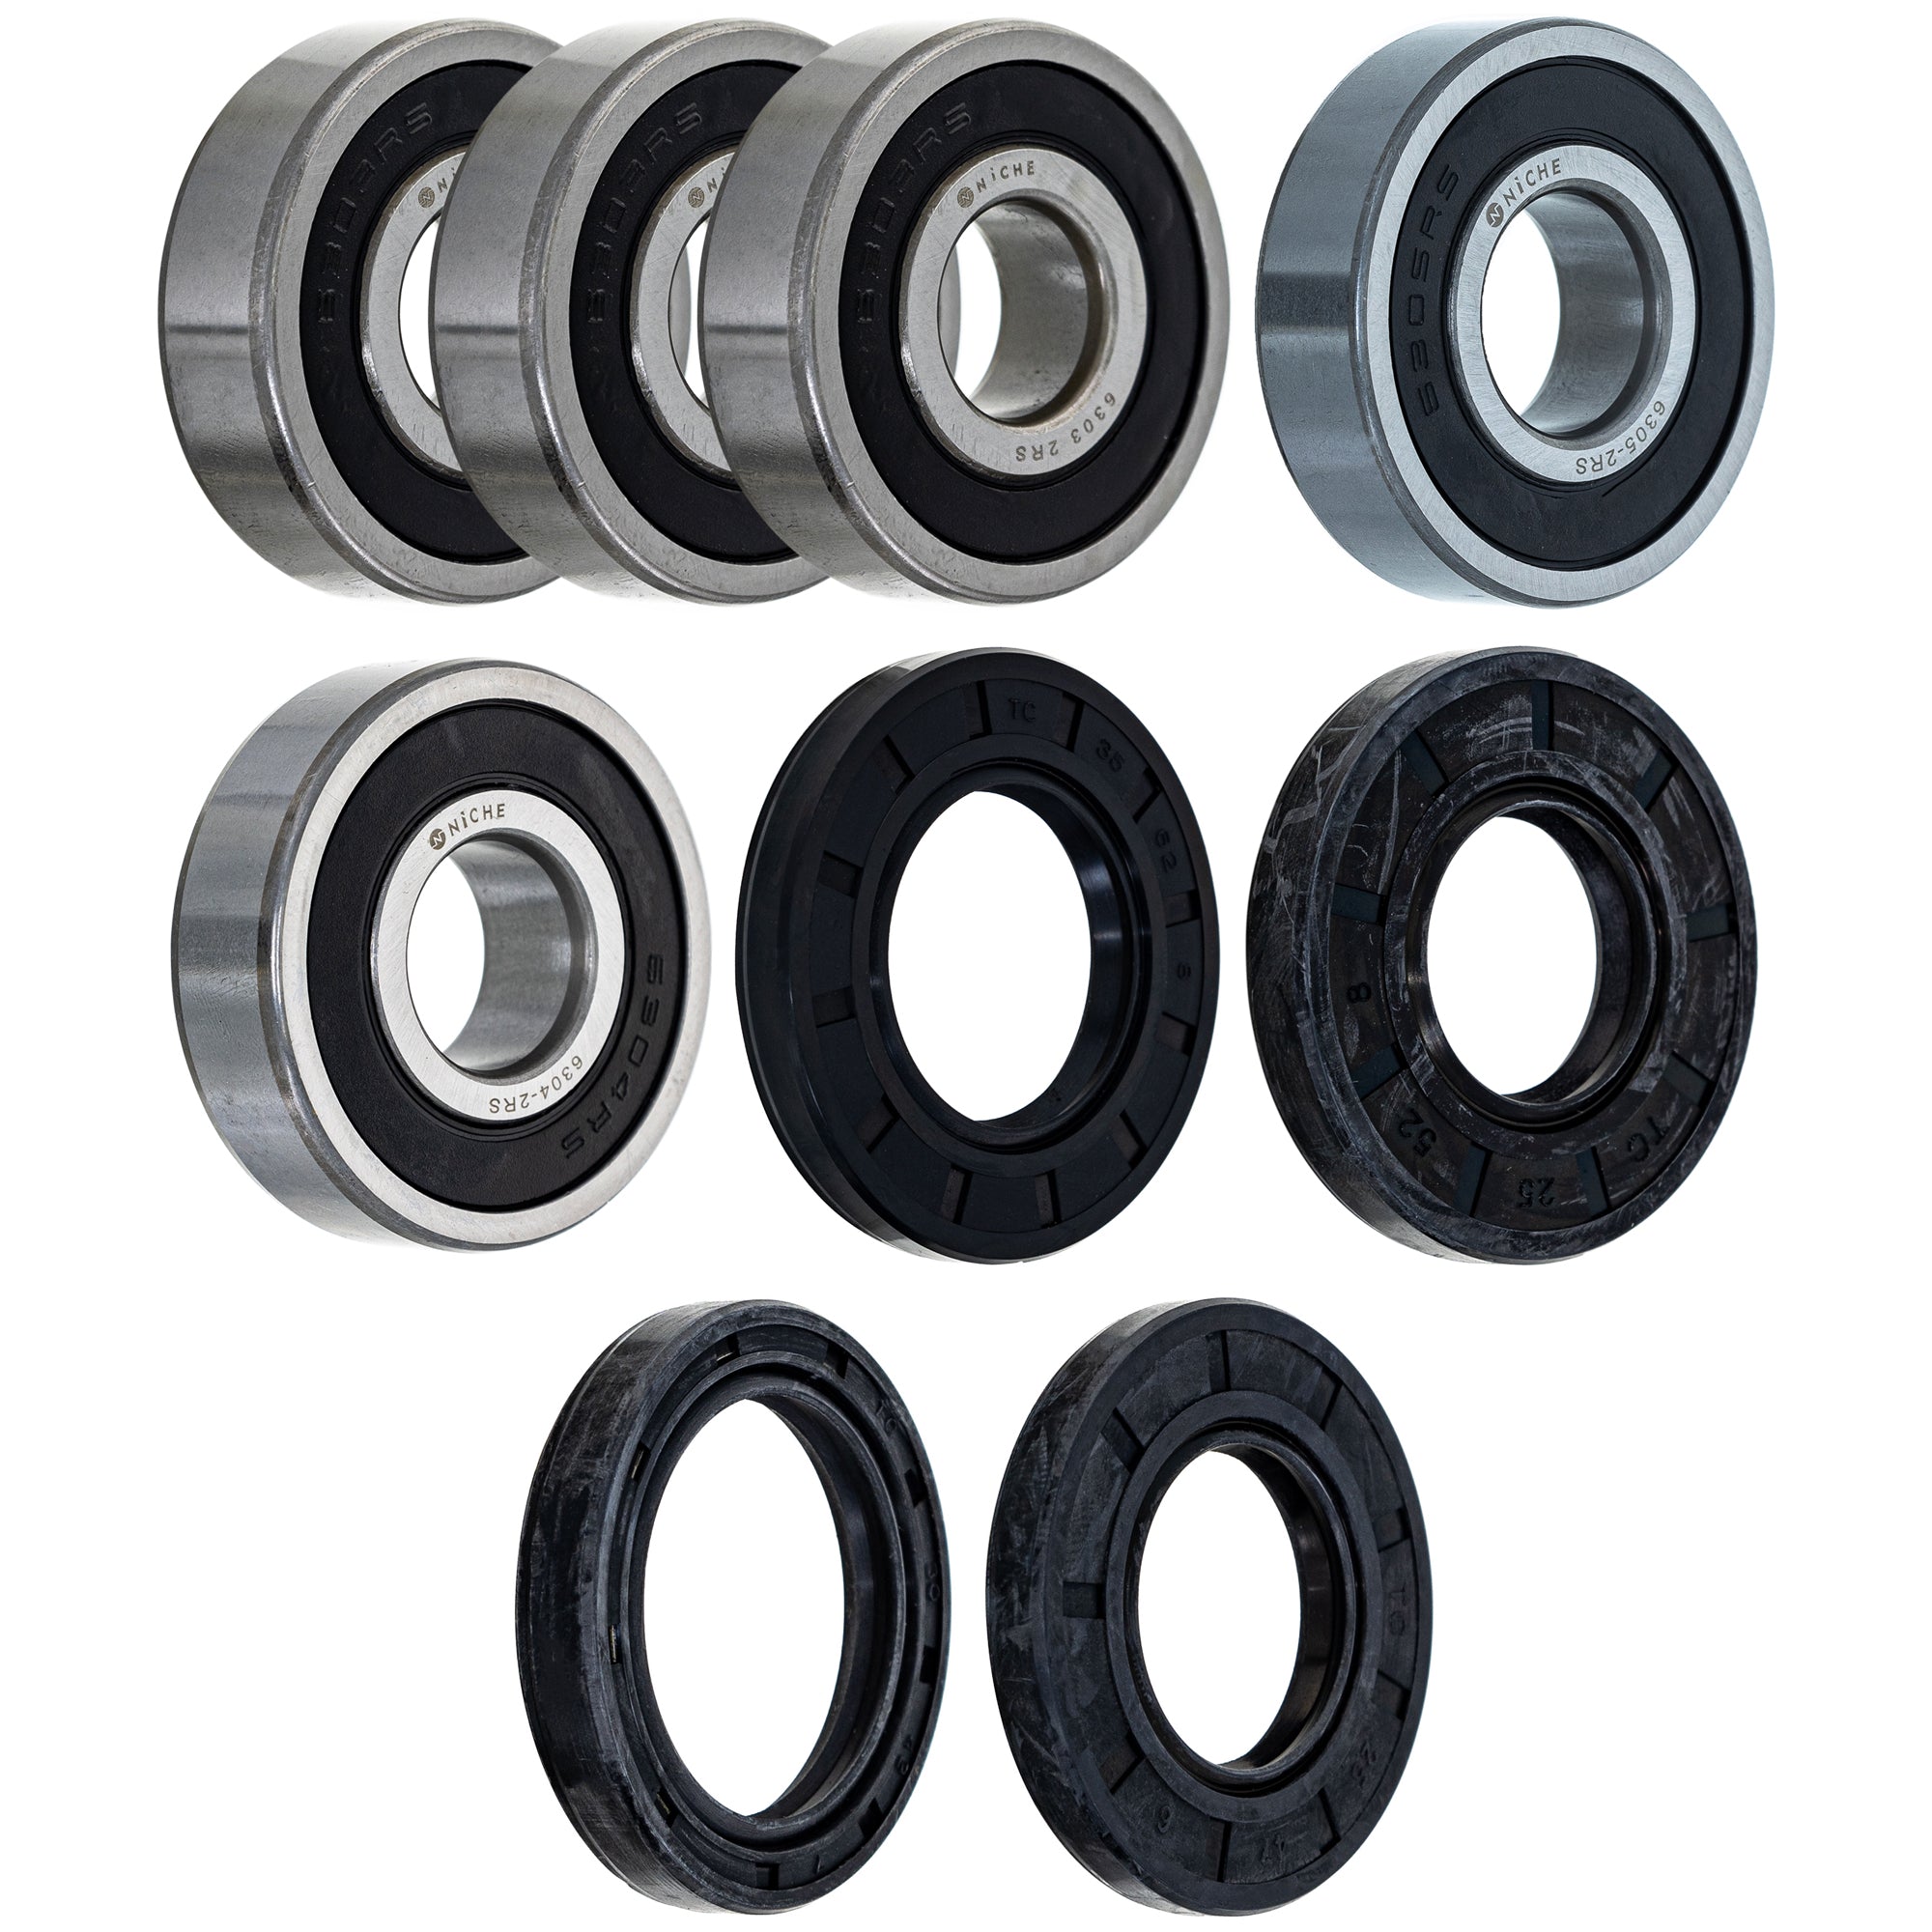 Wheel Bearing Seal Kit for zOTHER Ref No NICHE MK1008653